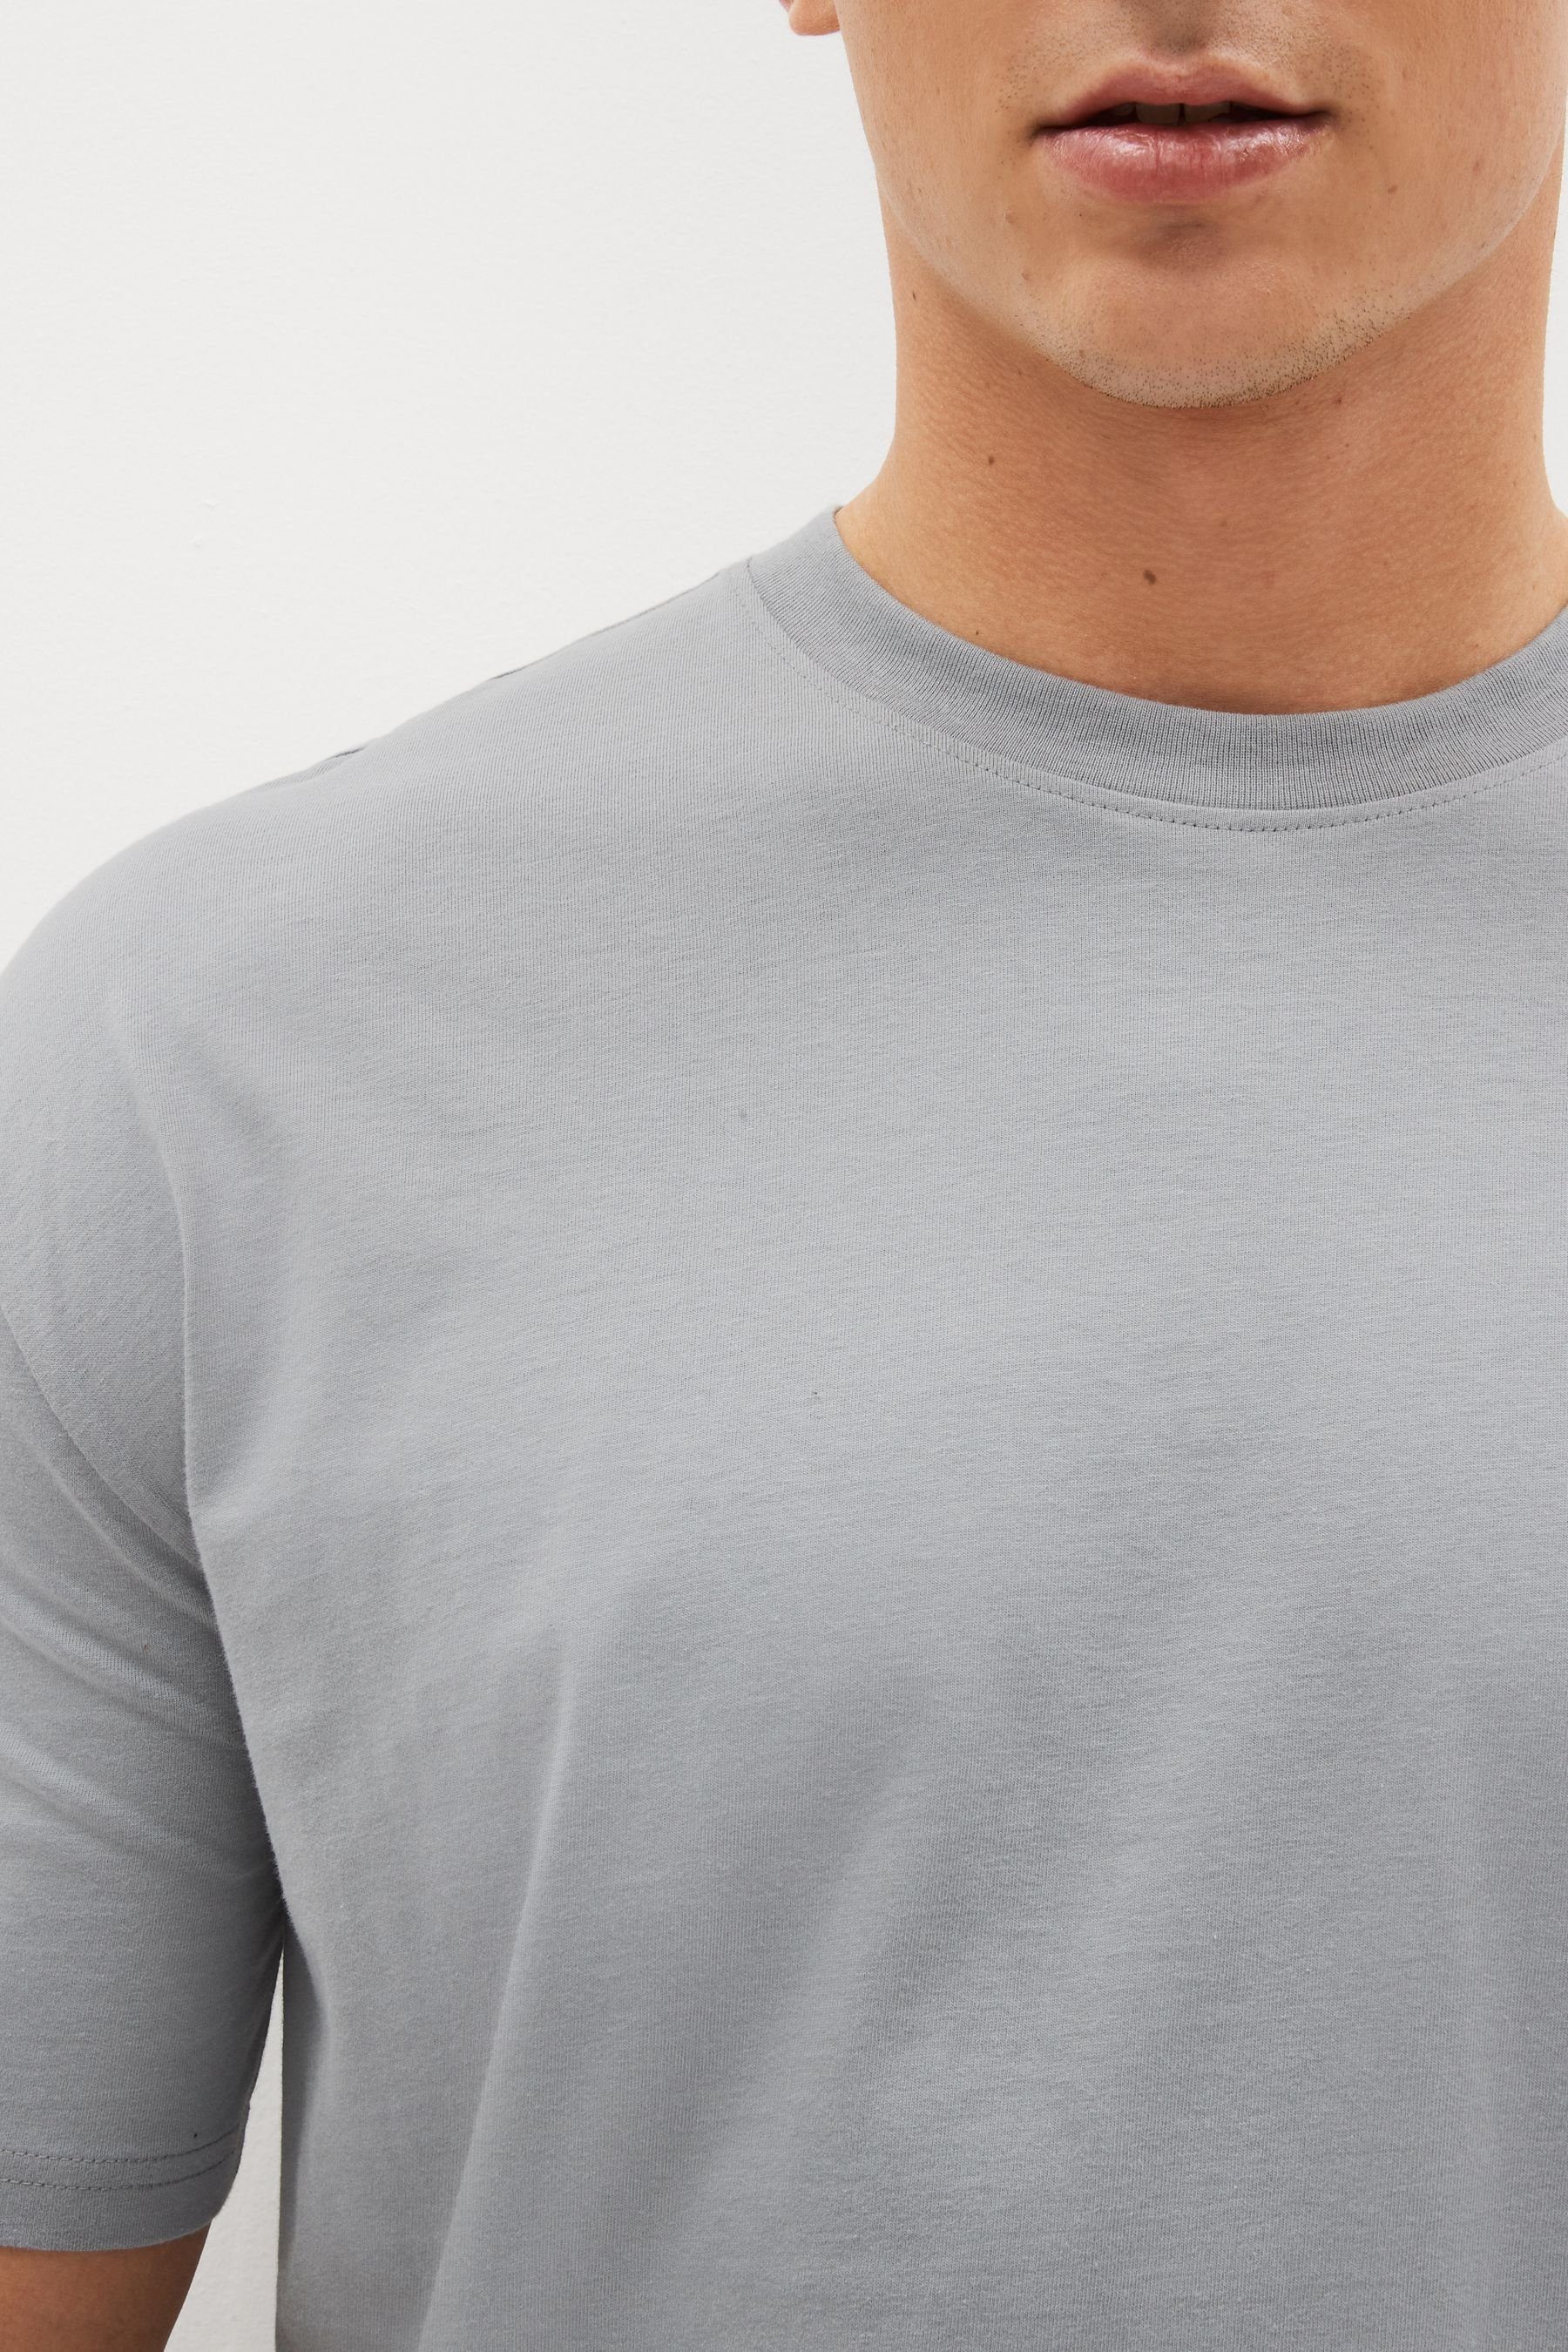 Grey Relaxed Rundhals-T-Shirt (1-tlg) im Fit Next T-Shirt Silver